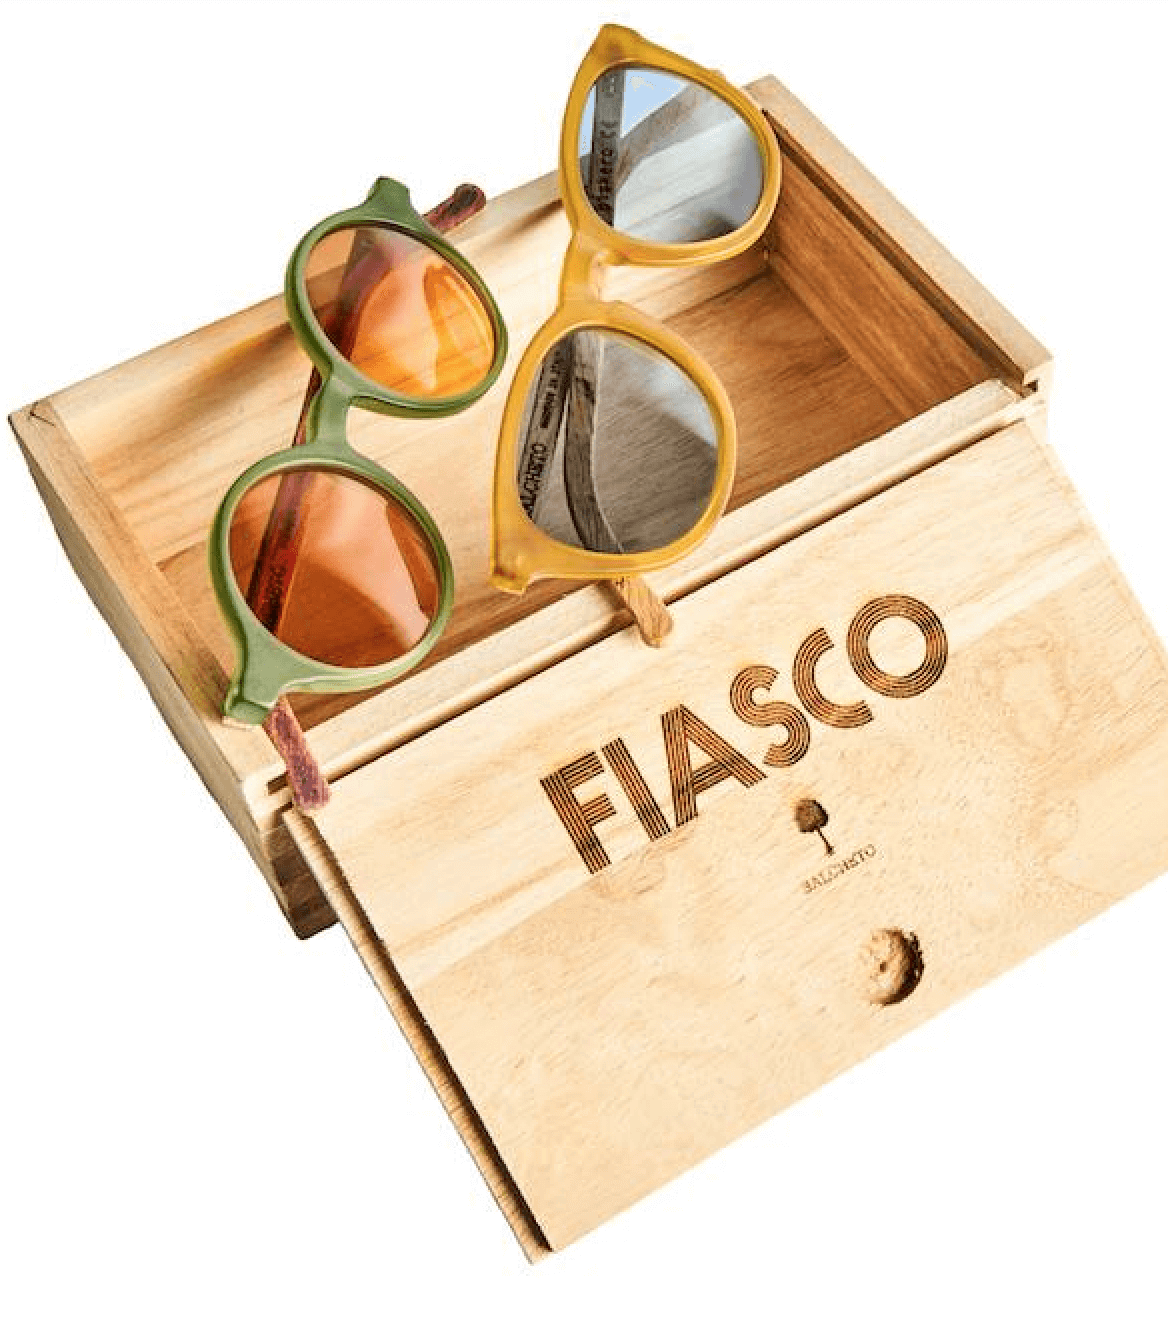 Ethical sunglasses made in Italy